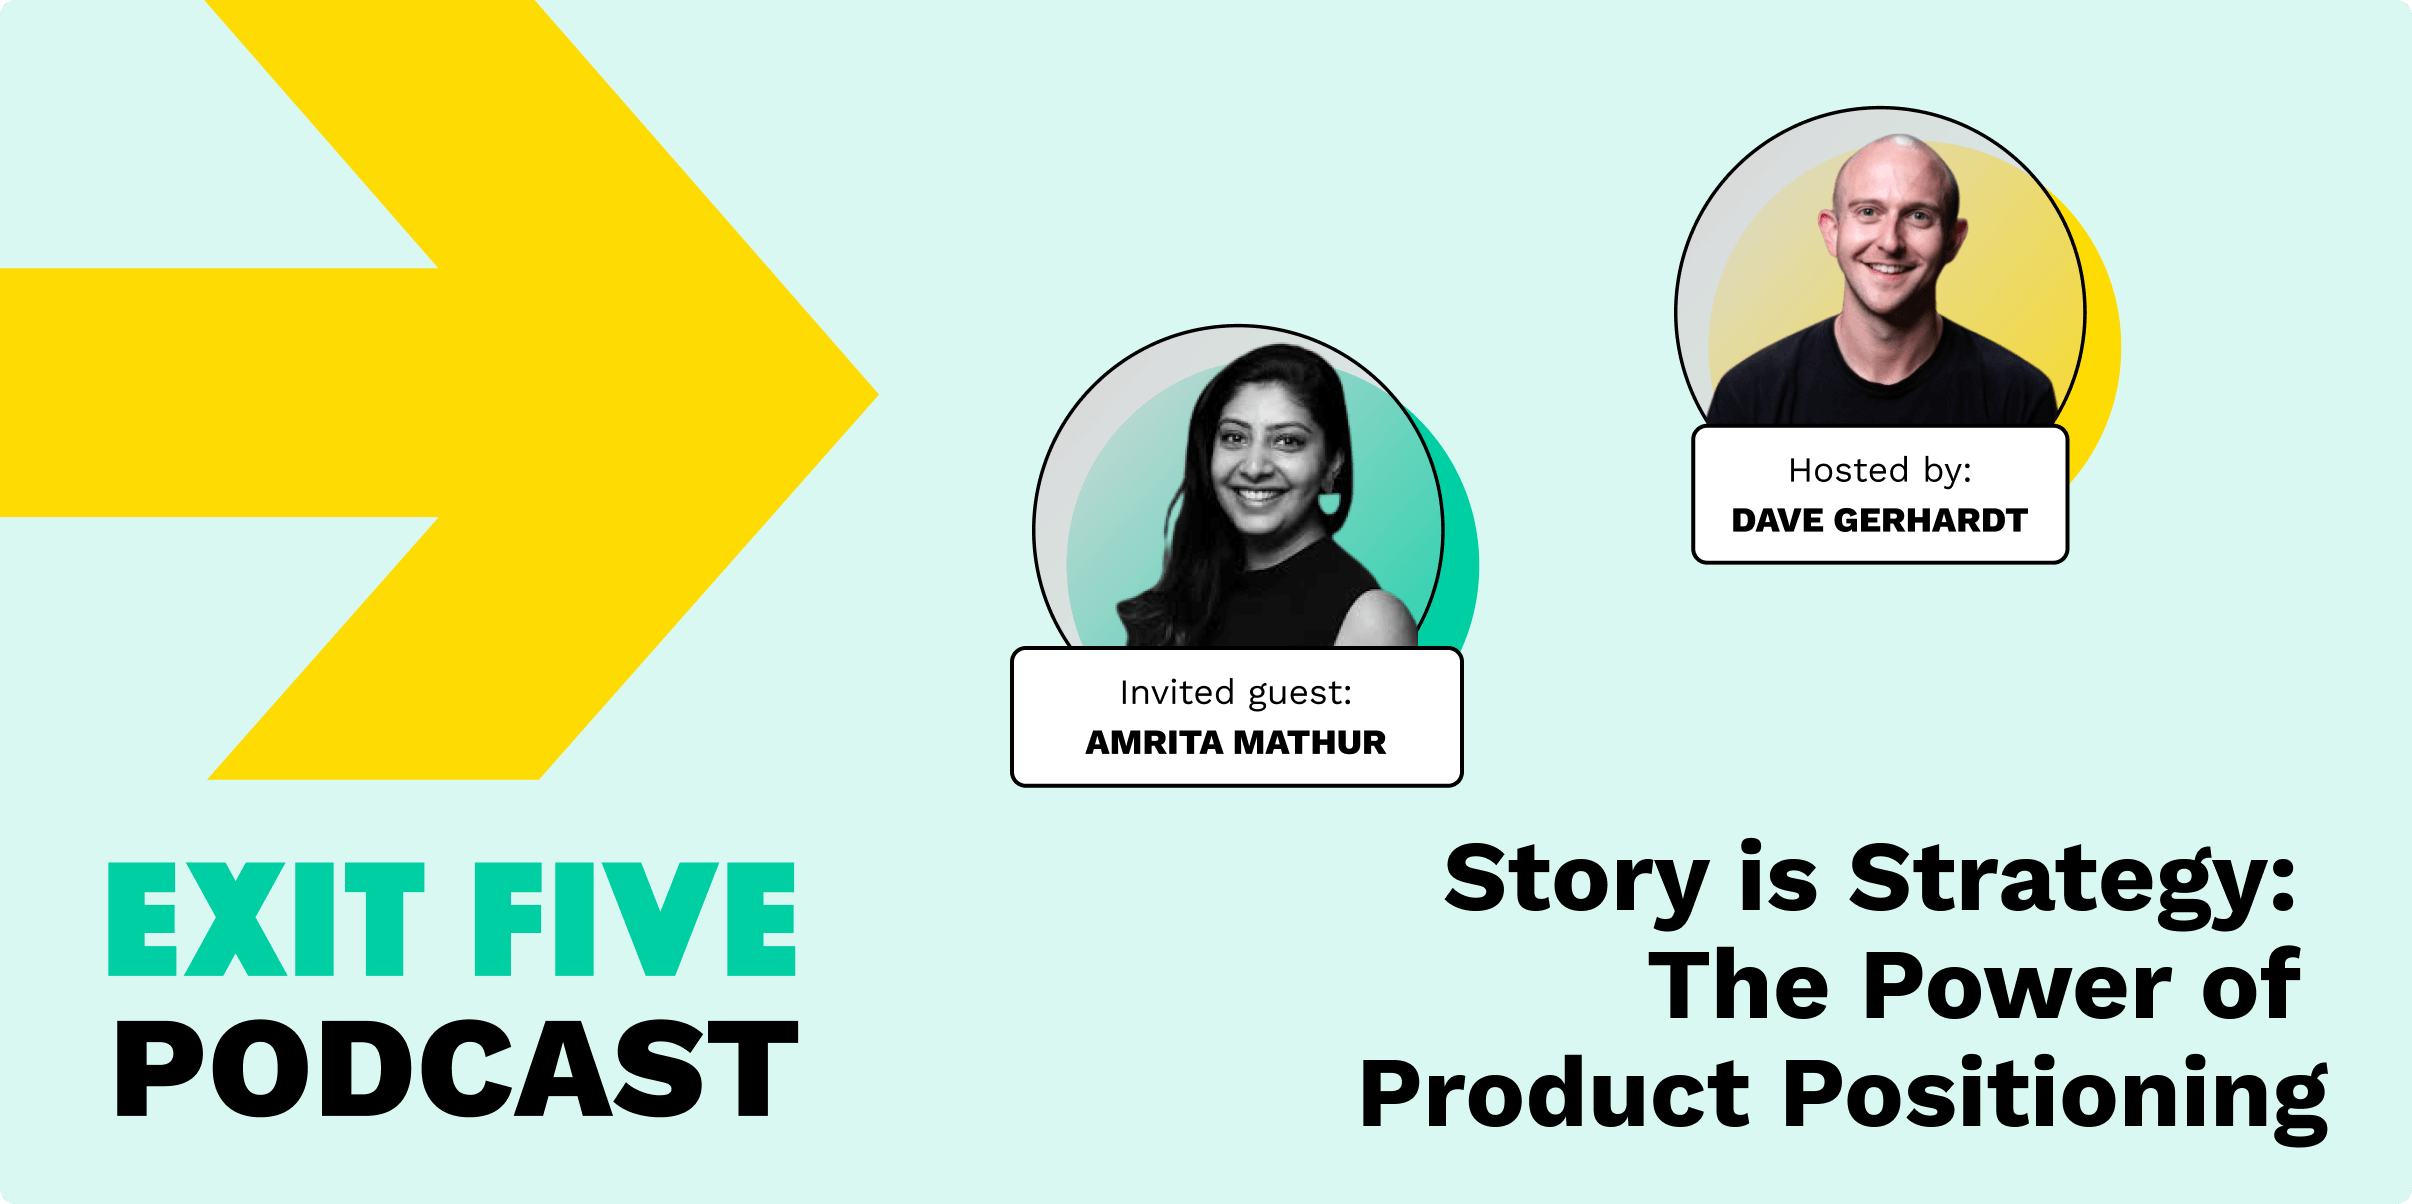 Story is Strategy - The Power of Product Positioning